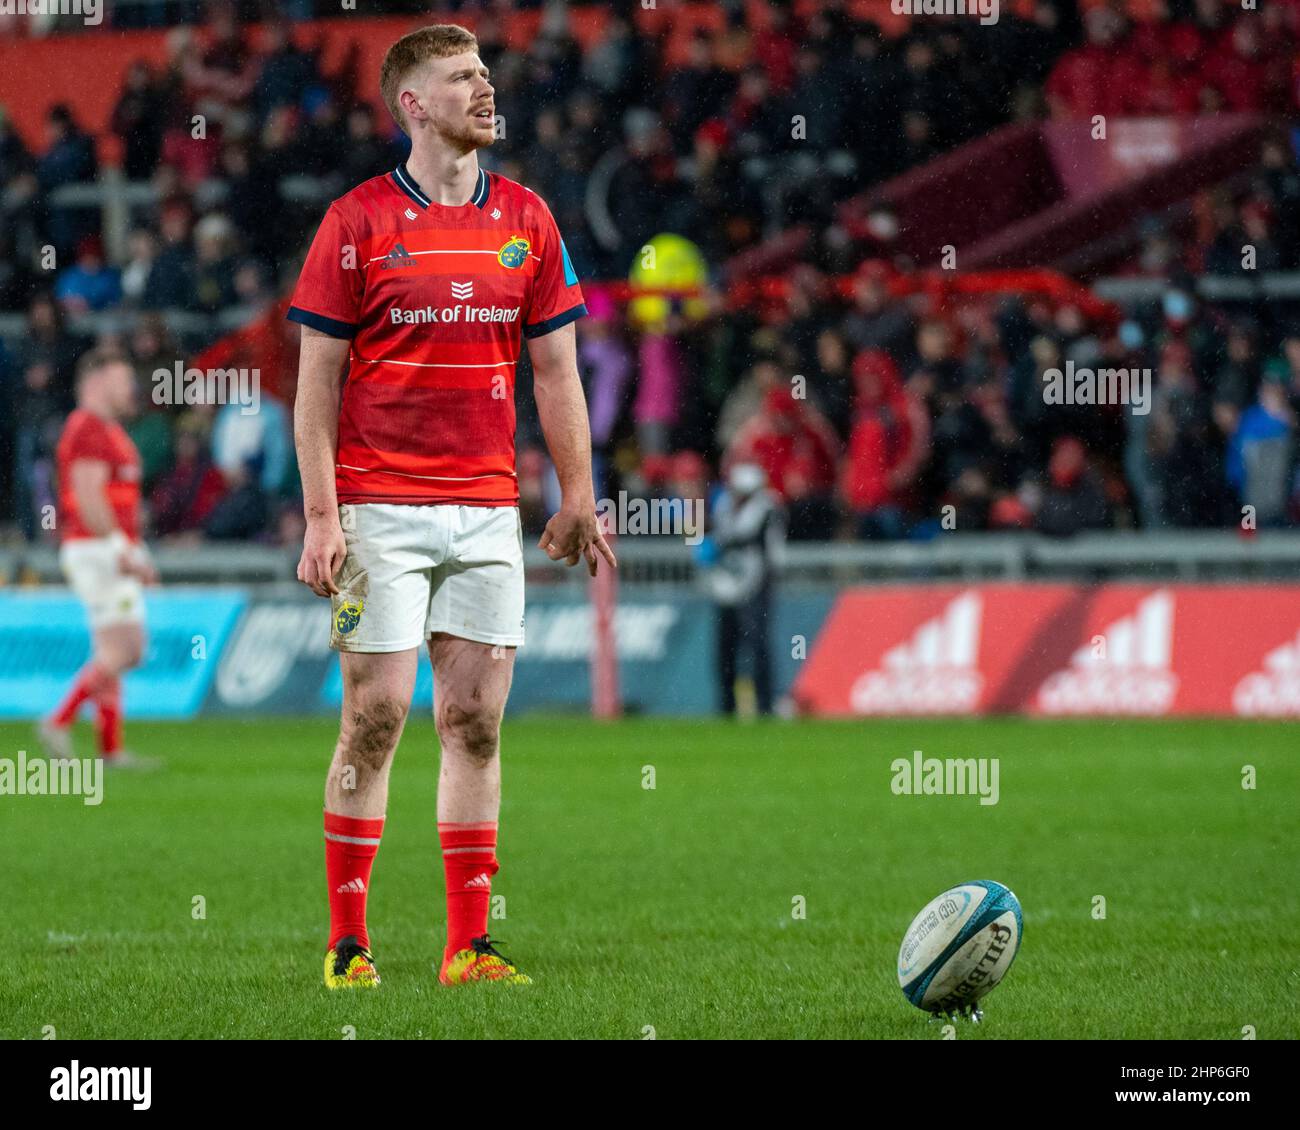 Ben Healy of Munster prepares to take a conversion during the United Rugby Championship Round 12 match between Munster Rugby and Edinburgh Rugby at Thomond Park in Limerick, Ireland on February 18,